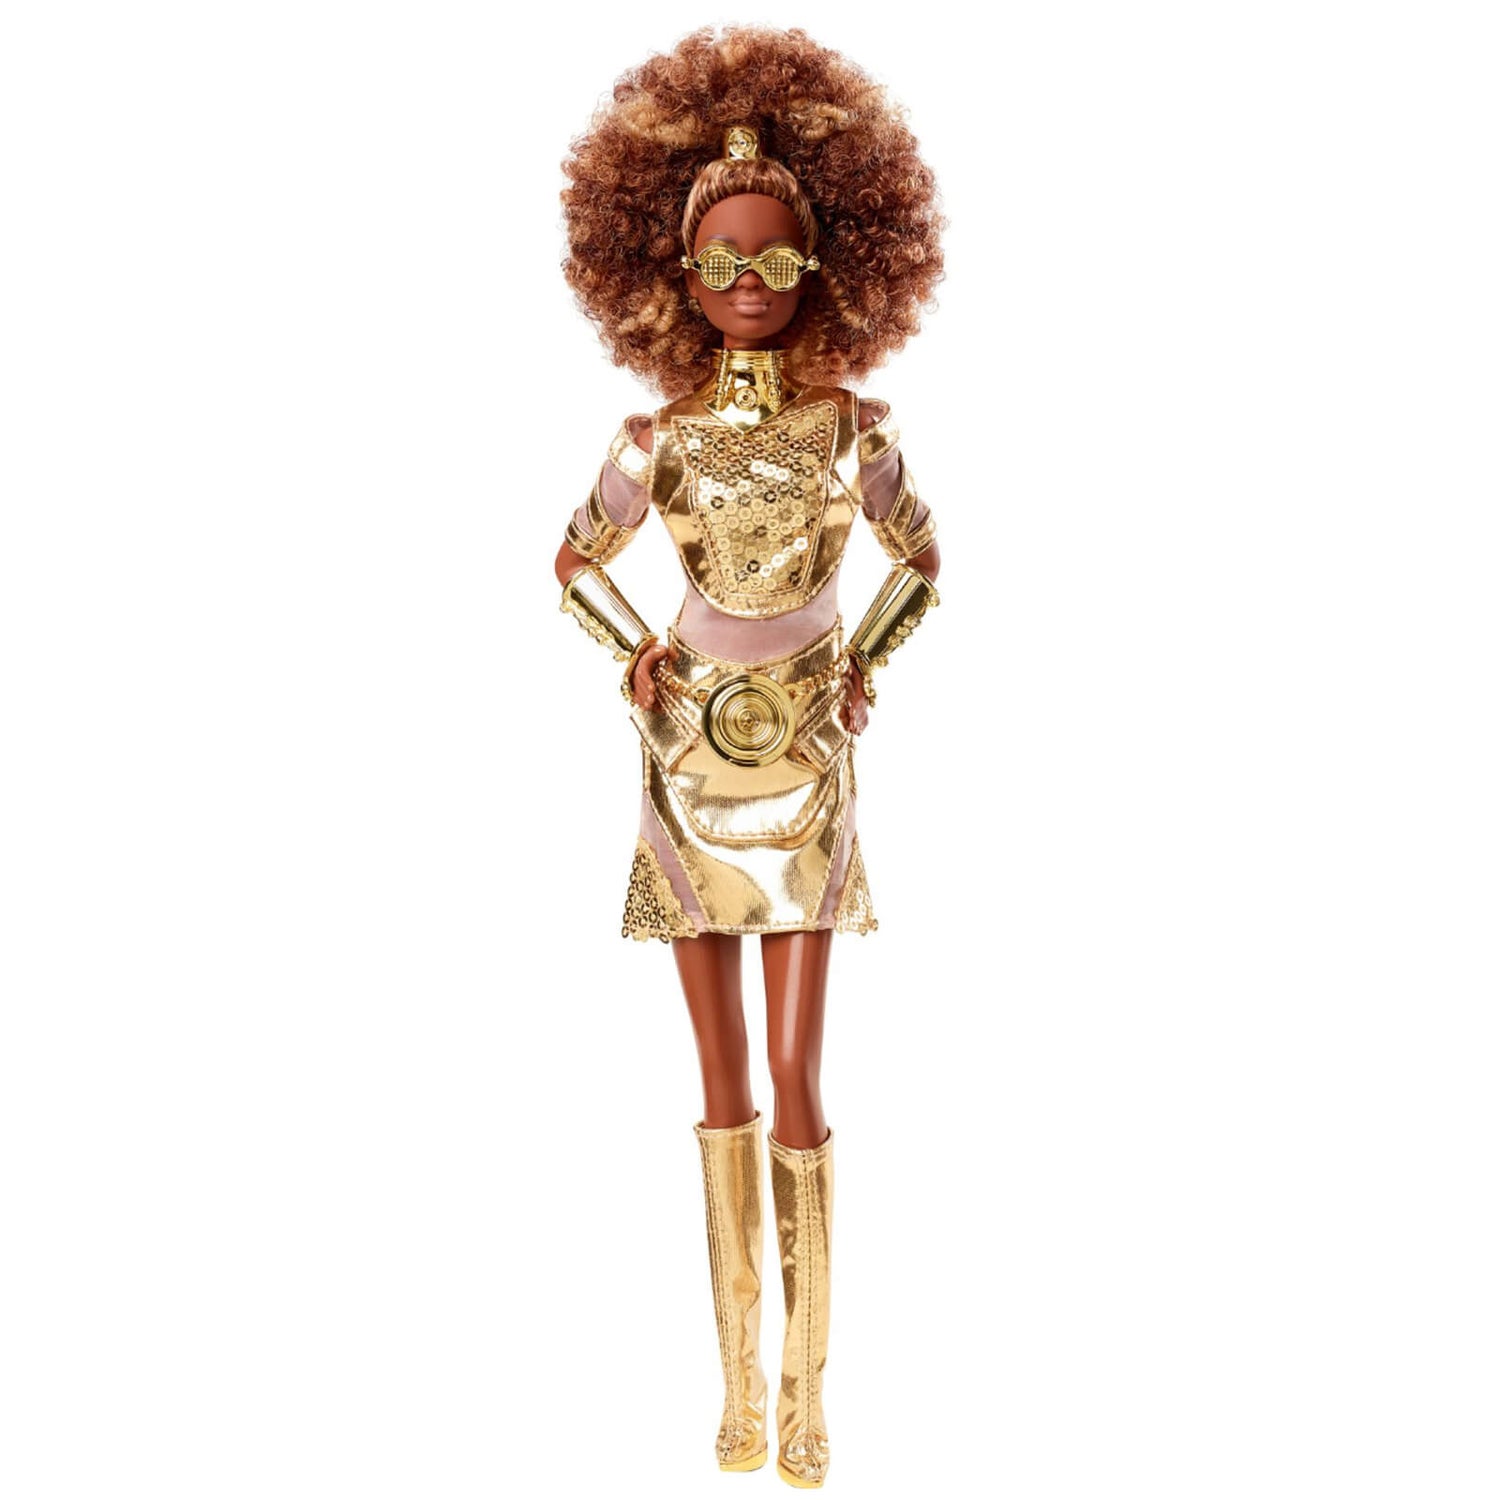 Barbie Signature Collection Star Wars C-3PO Doll